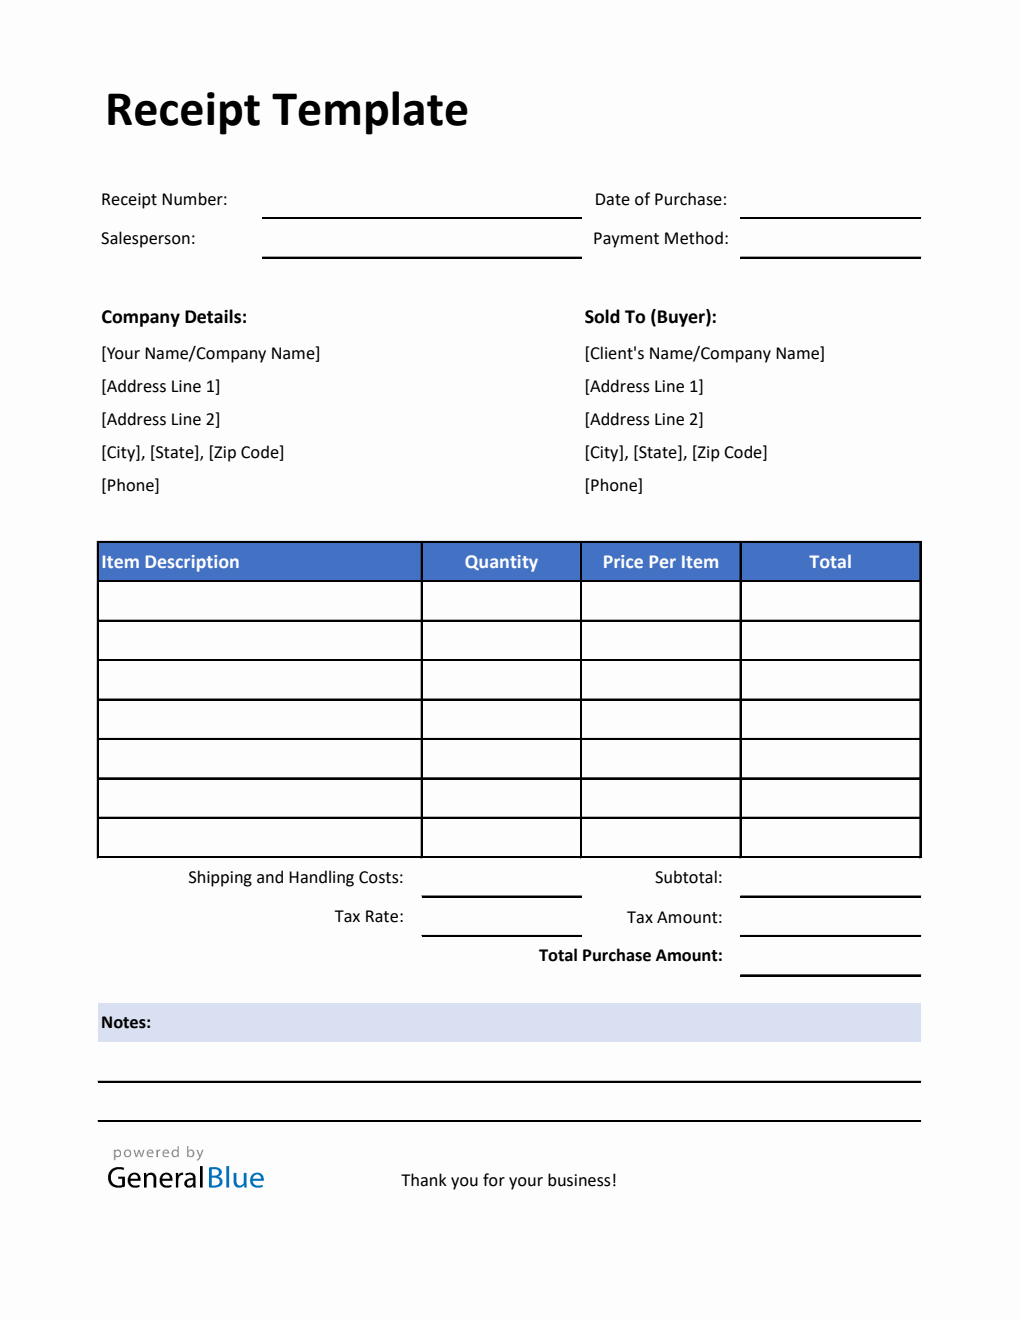 Simple Receipt Template with Notes in Excel